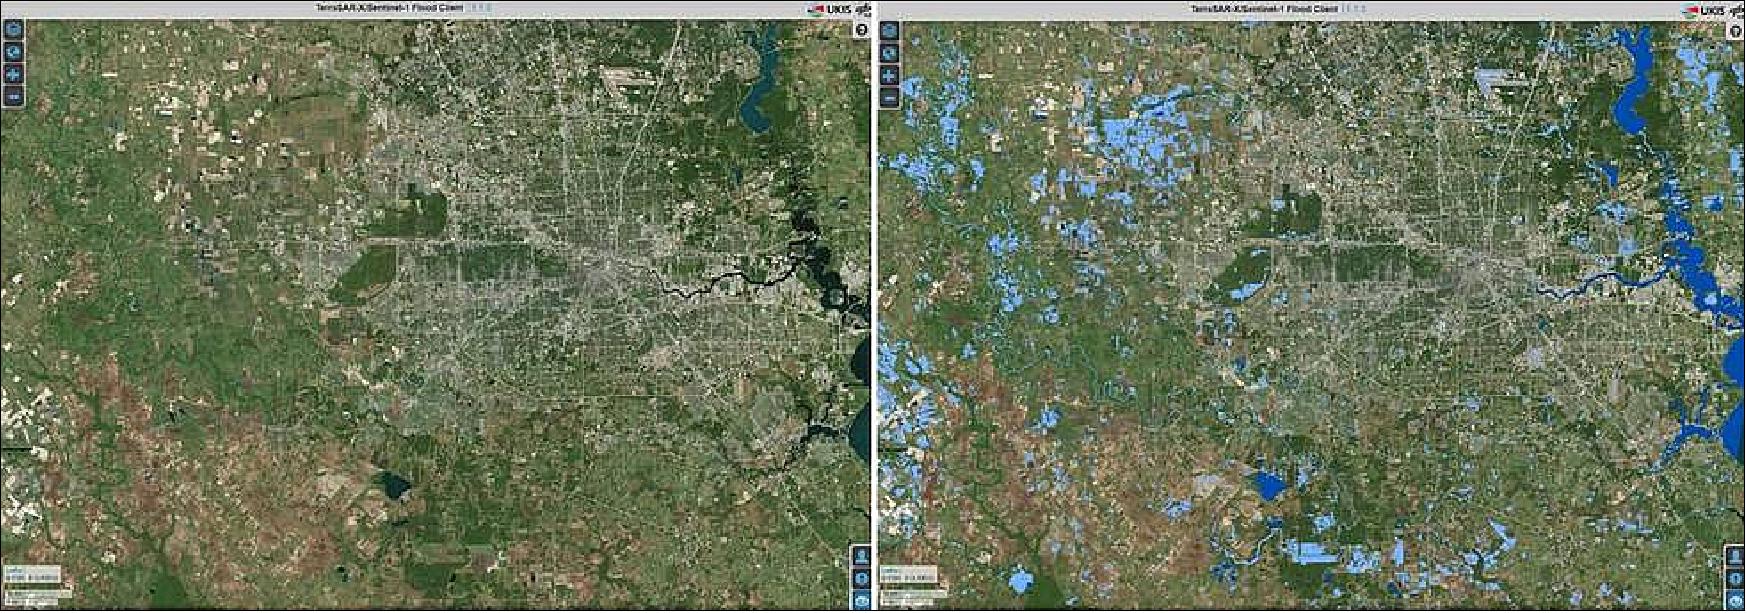 Figure 95: DLR provided before and after satellite data for Hurricane Harvey (image credit: DLR)